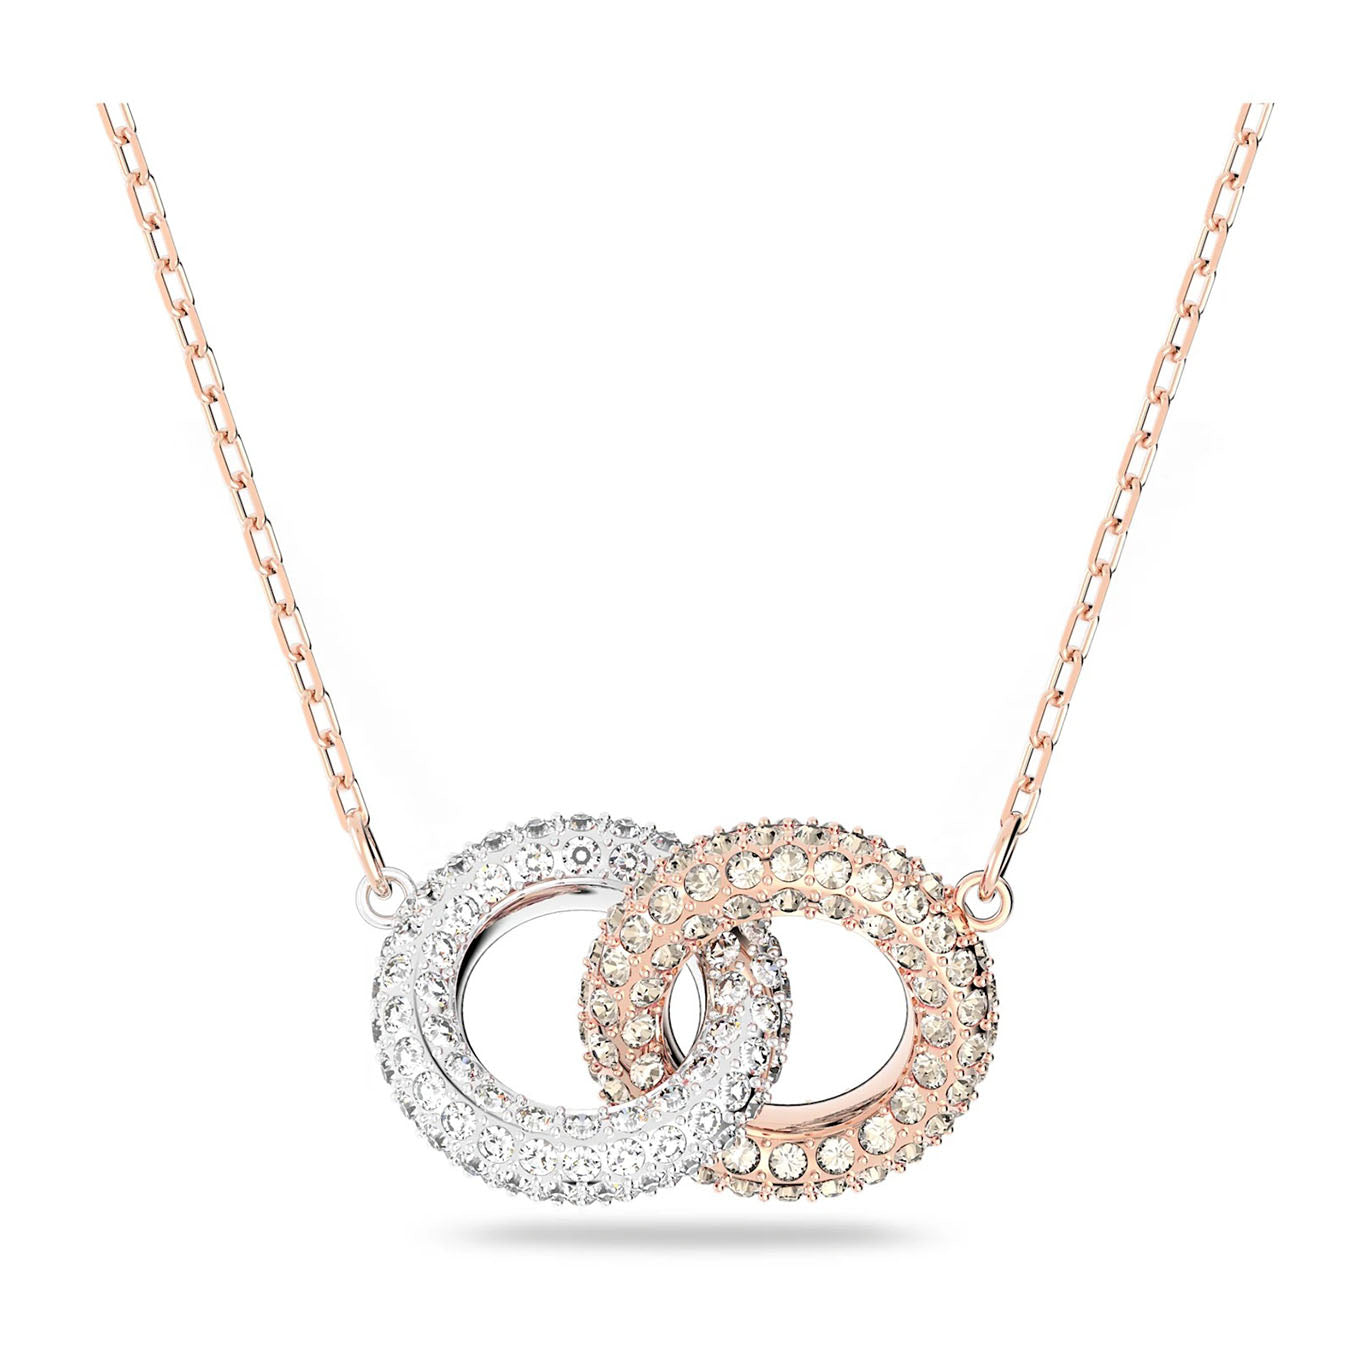 Swarovski Silver and Rose Gold Crystal Circles Necklace